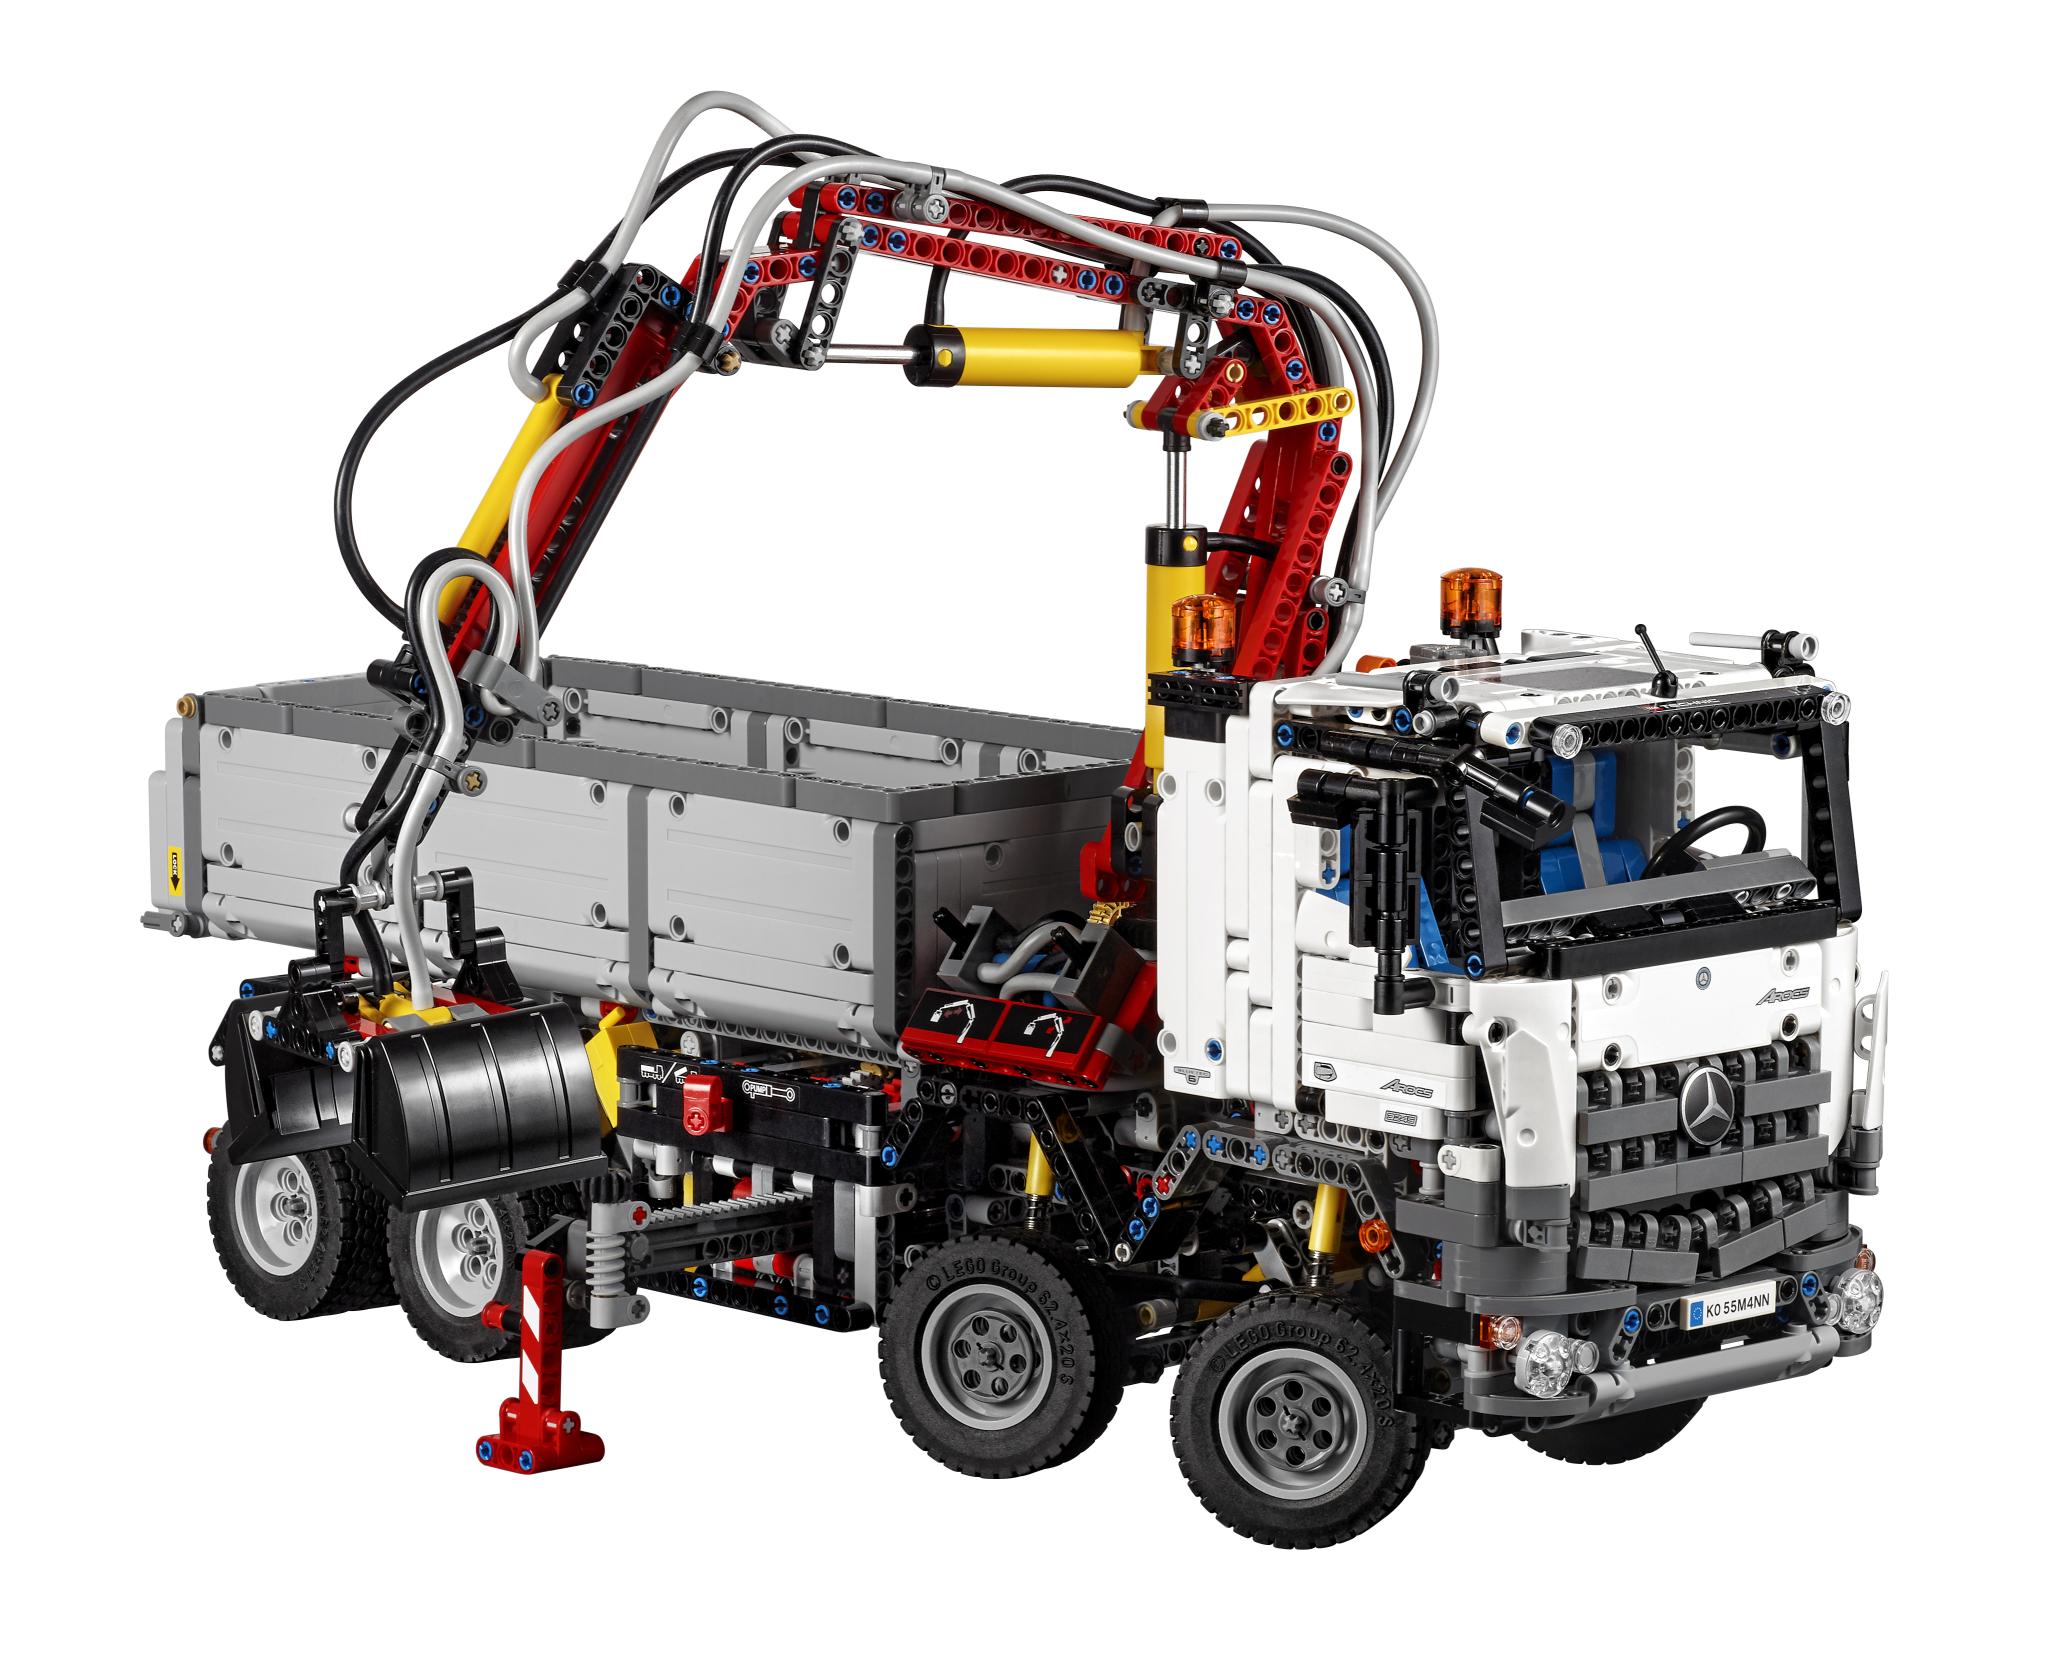 Mercedes-Benz Arocs 3245 Launched, It's a Lego Technic Truck Made of Almost 3,000 Pieces 